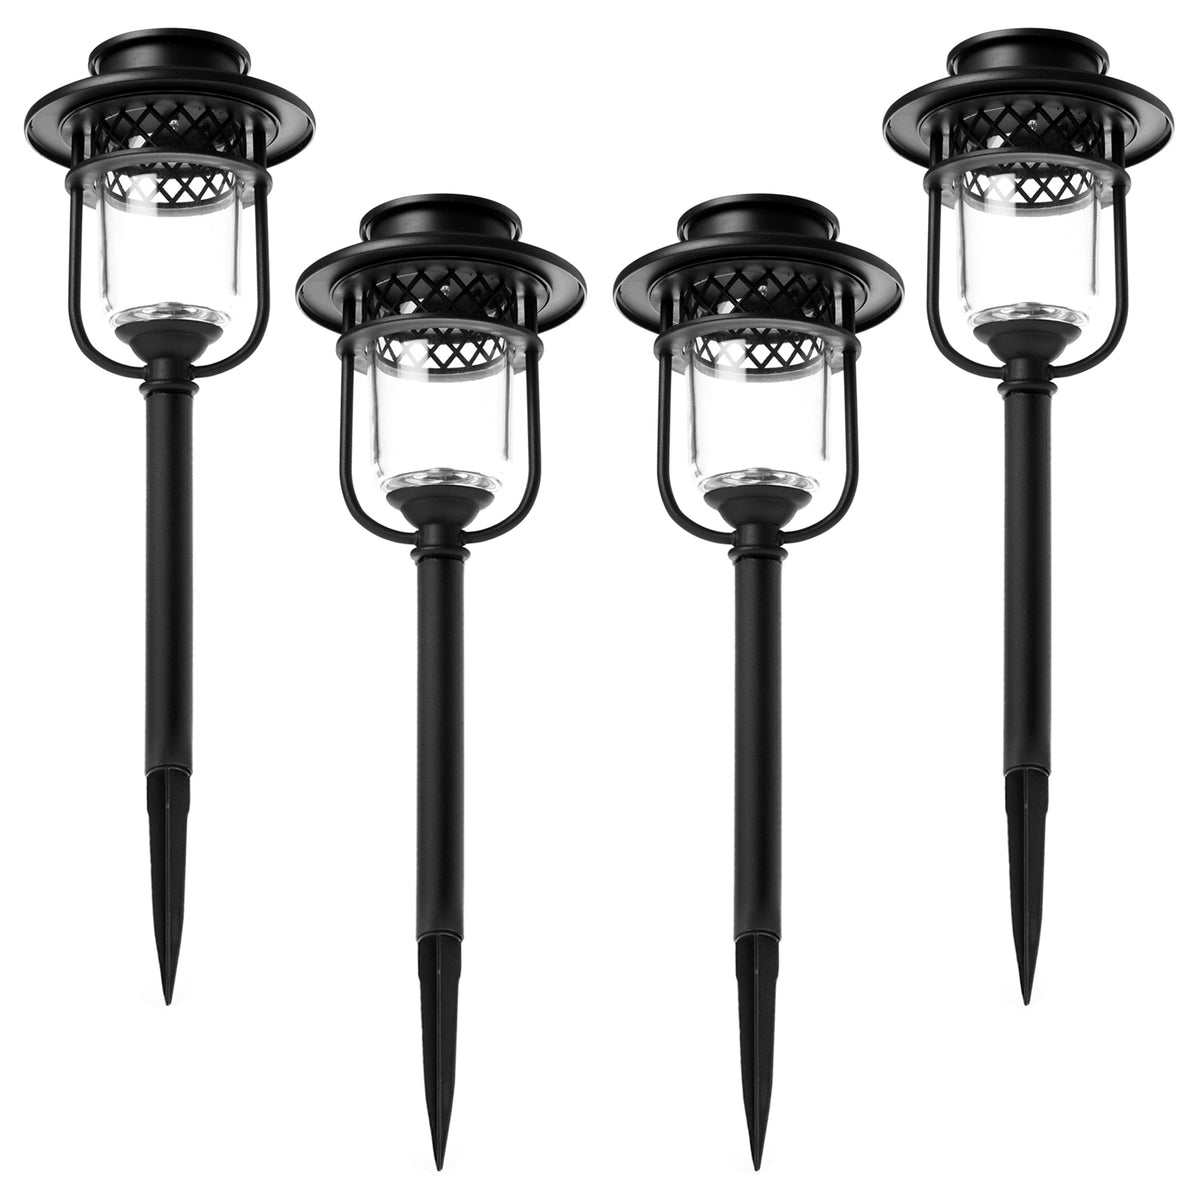 Home Zone Security Pathway & Garden Solar Glass Lights Stainless Steel 4 Set